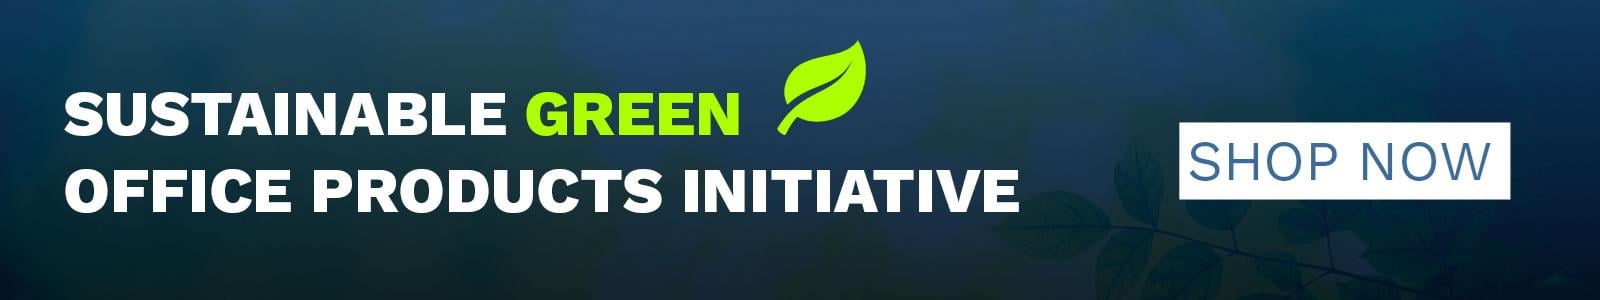 Sustainable Green Office Product Initiative